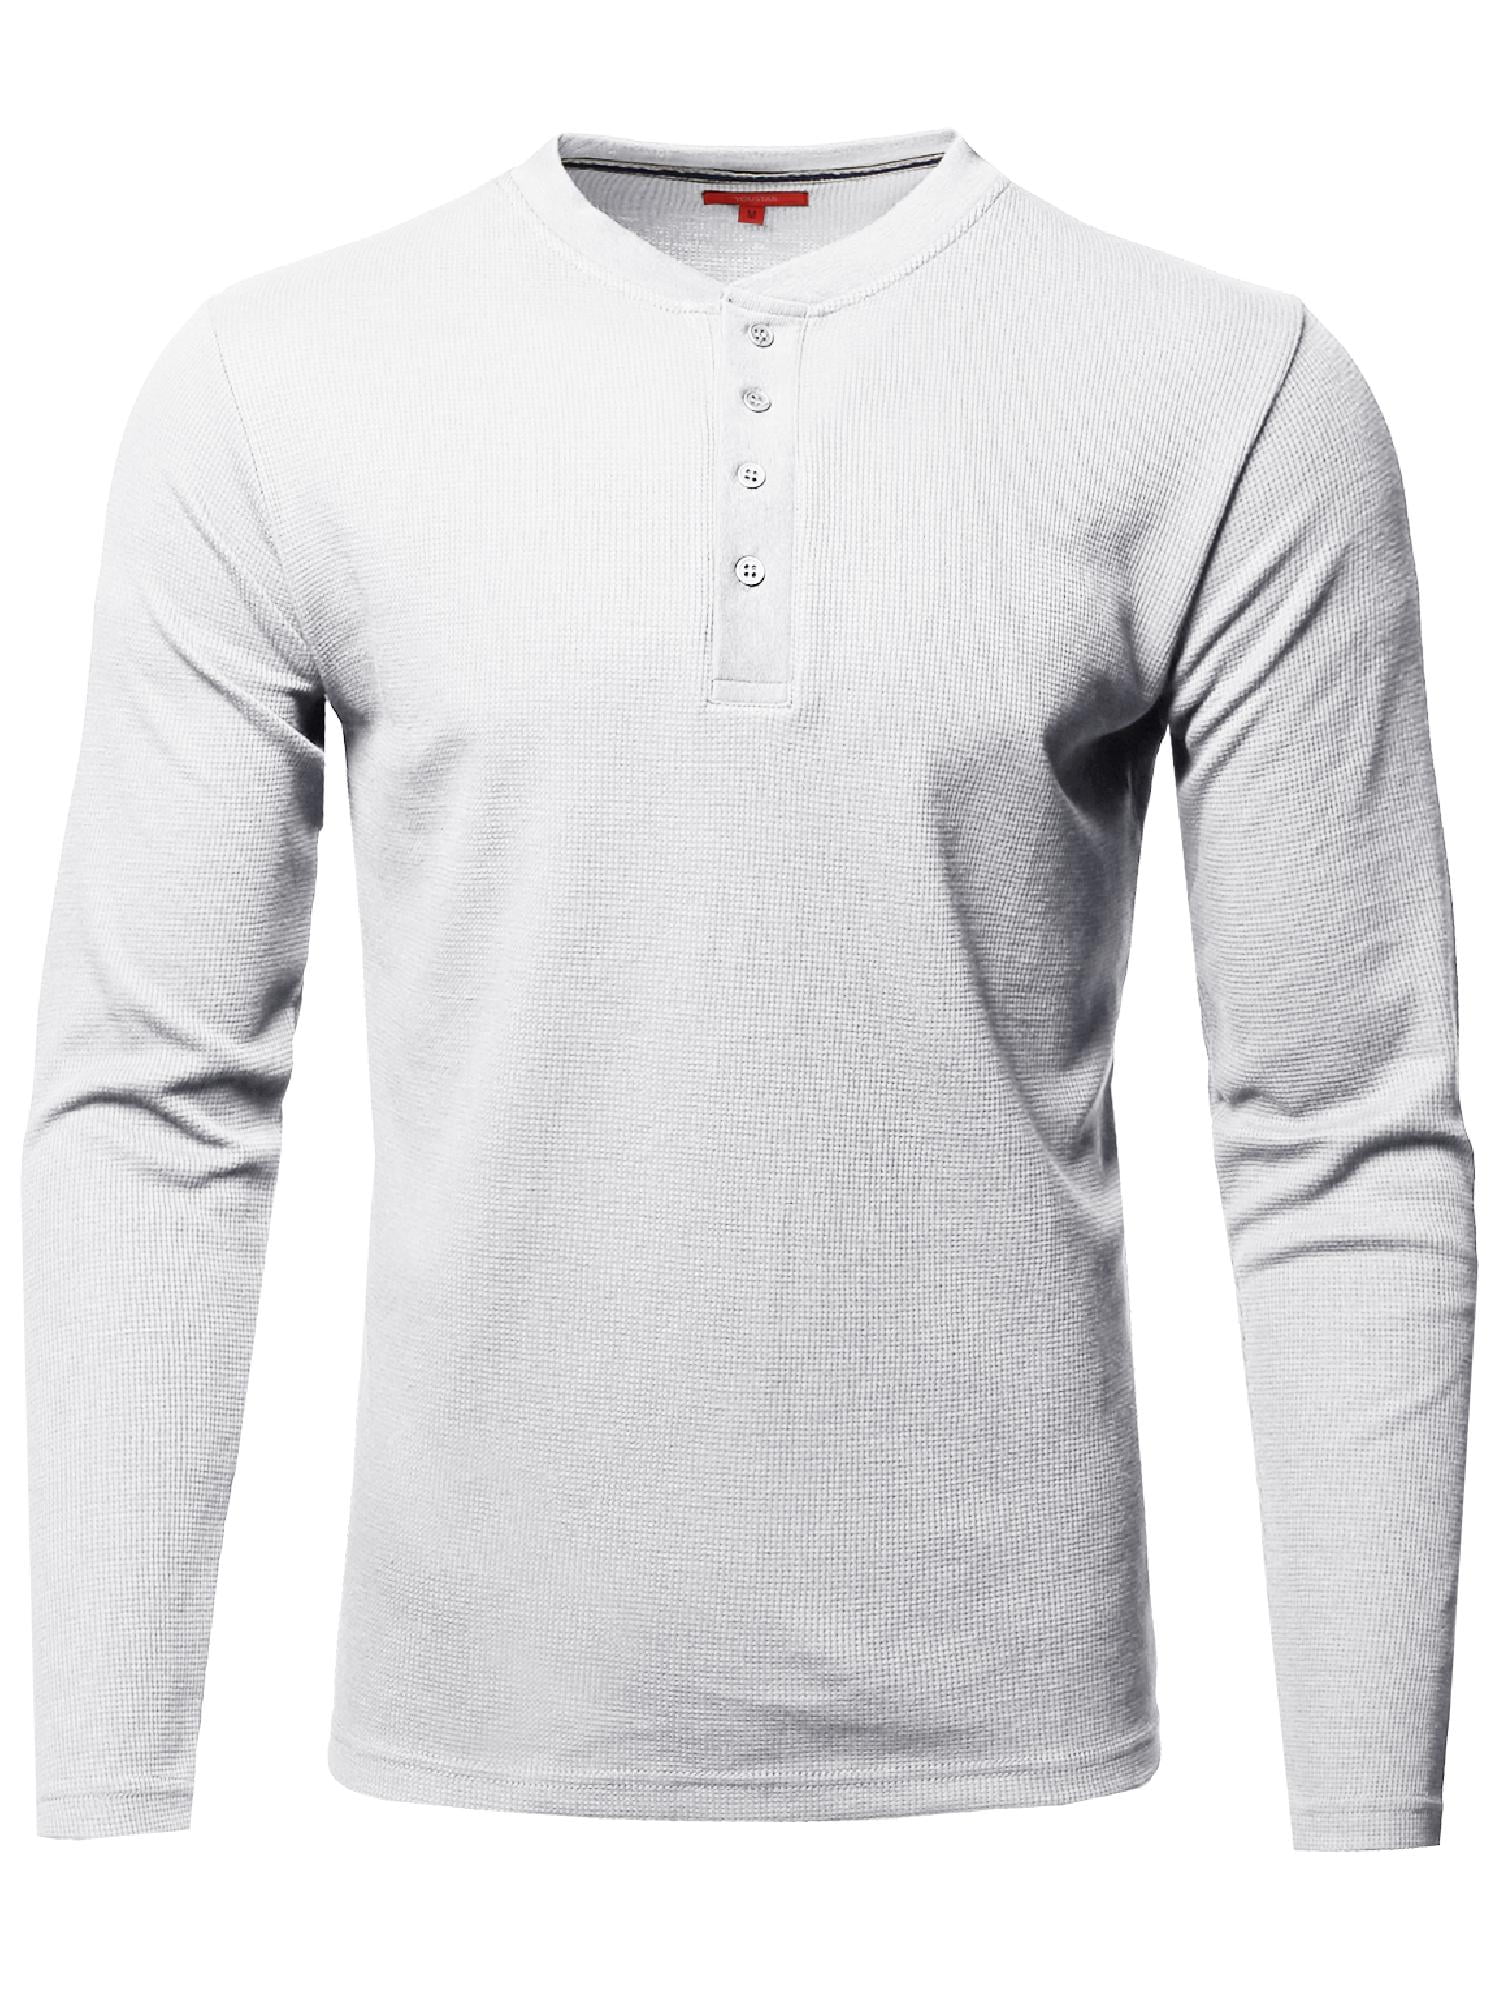 FashionOutfit Men's Thermal Henley Crew Neck Long Sleeve T-Shirt ...